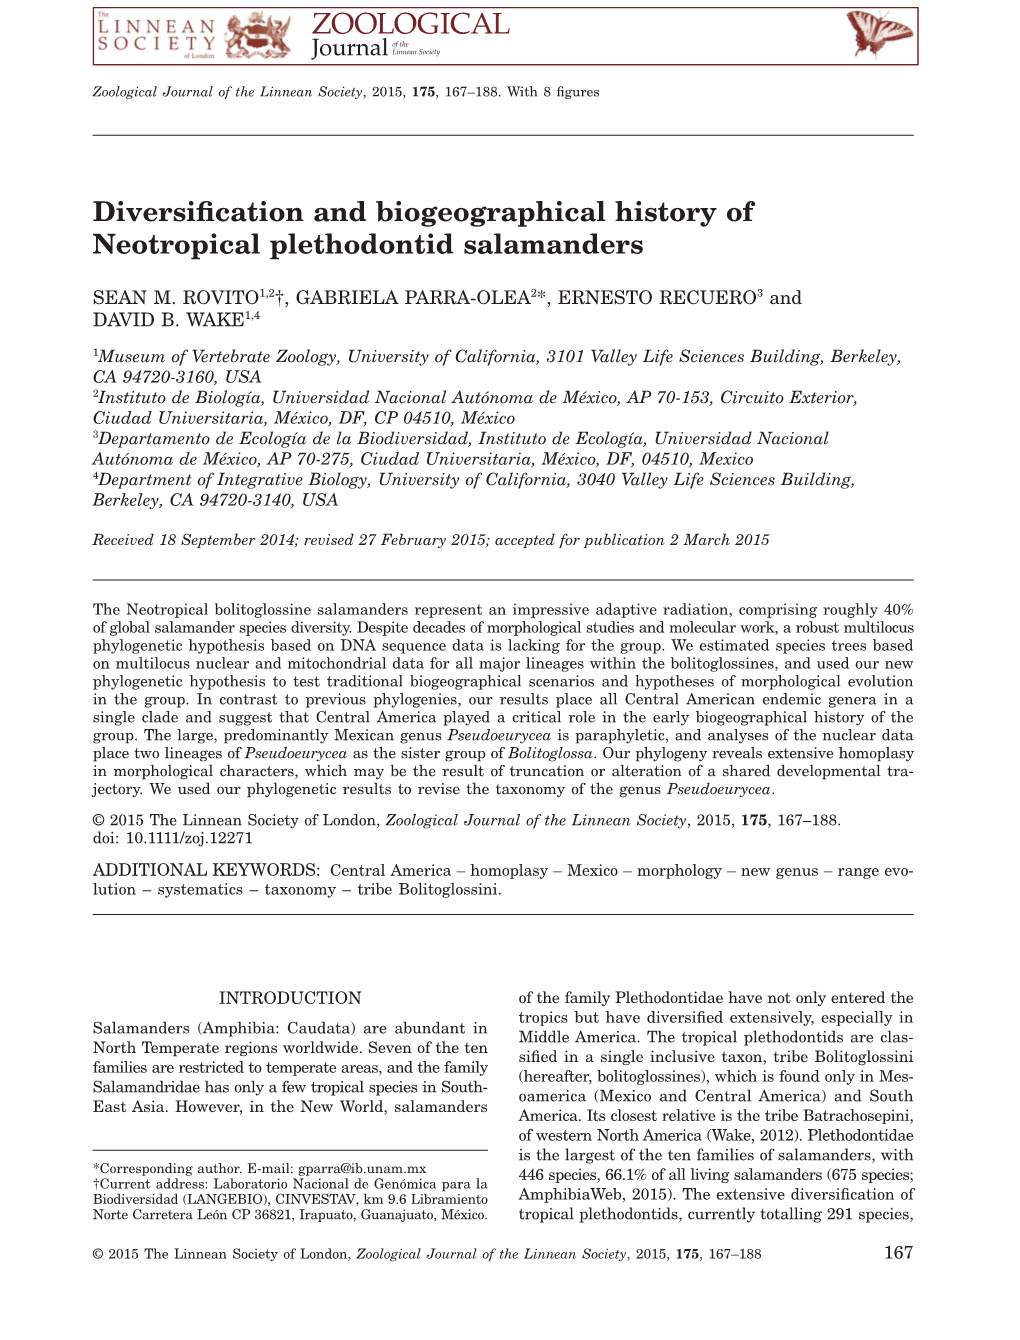 Diversification and Biogeographical History of Neotropical Plethodontid